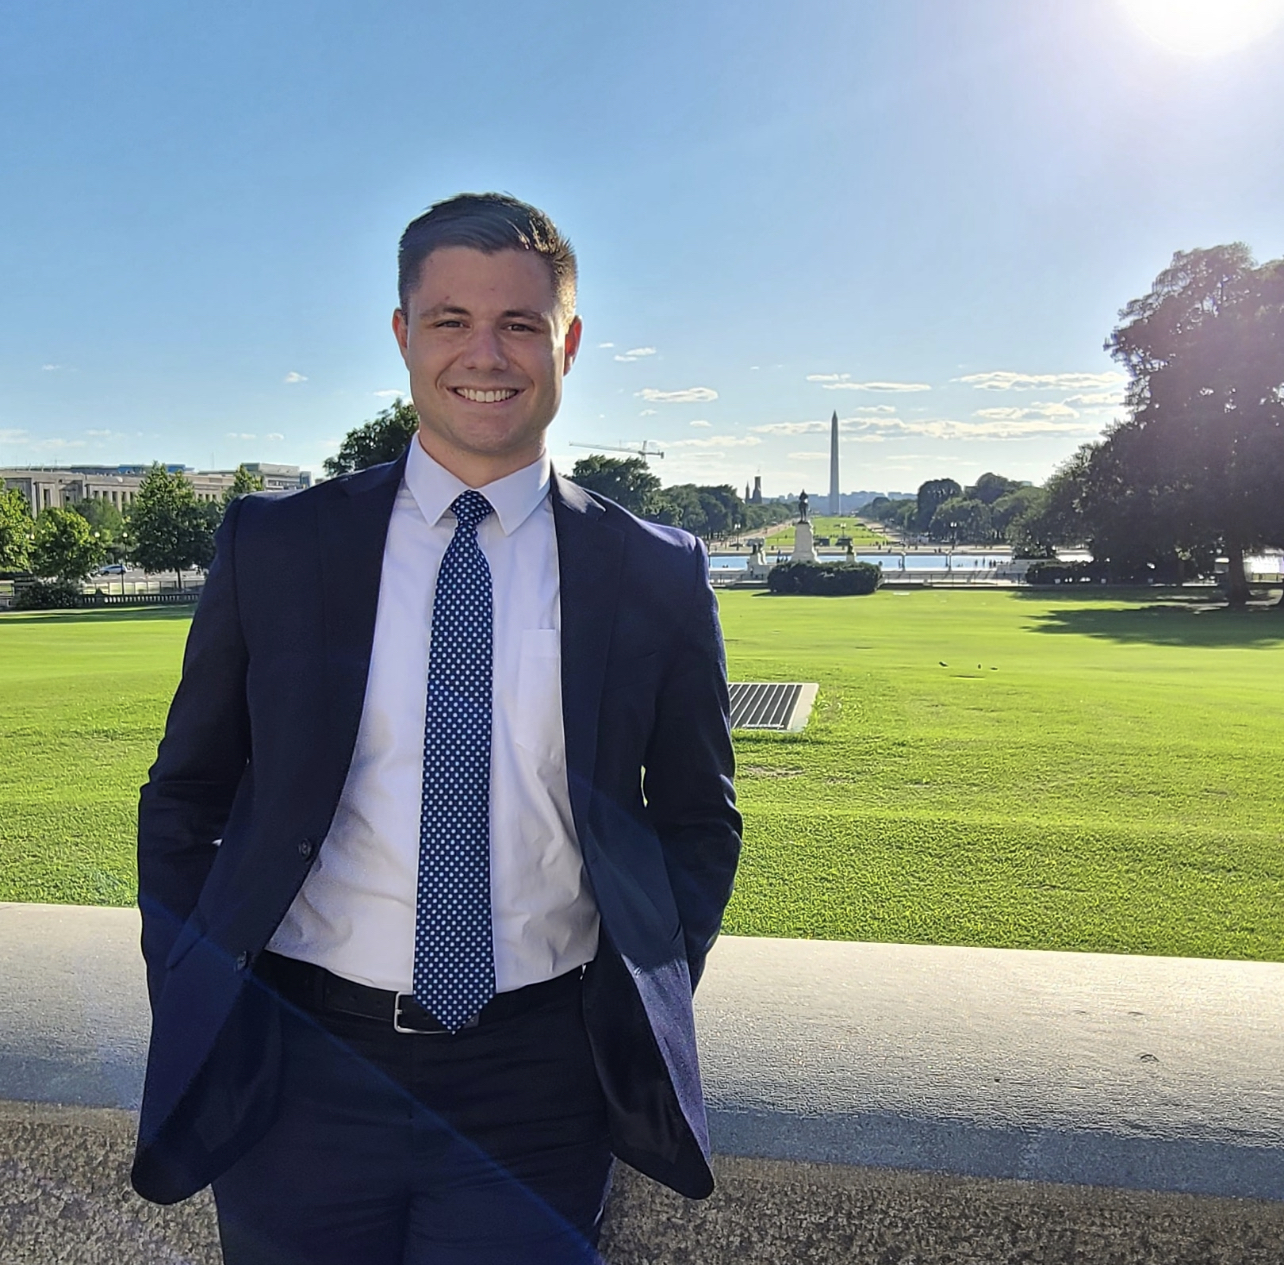 As an intern for U.S. Senator Todd Young, McCullough spent his 2021 summer in Washington, D.C. He learned about the Senate’s role in government and got the opportunity to conduct policy research, attend hearings, assist staff, and respond to constituent inquiries.